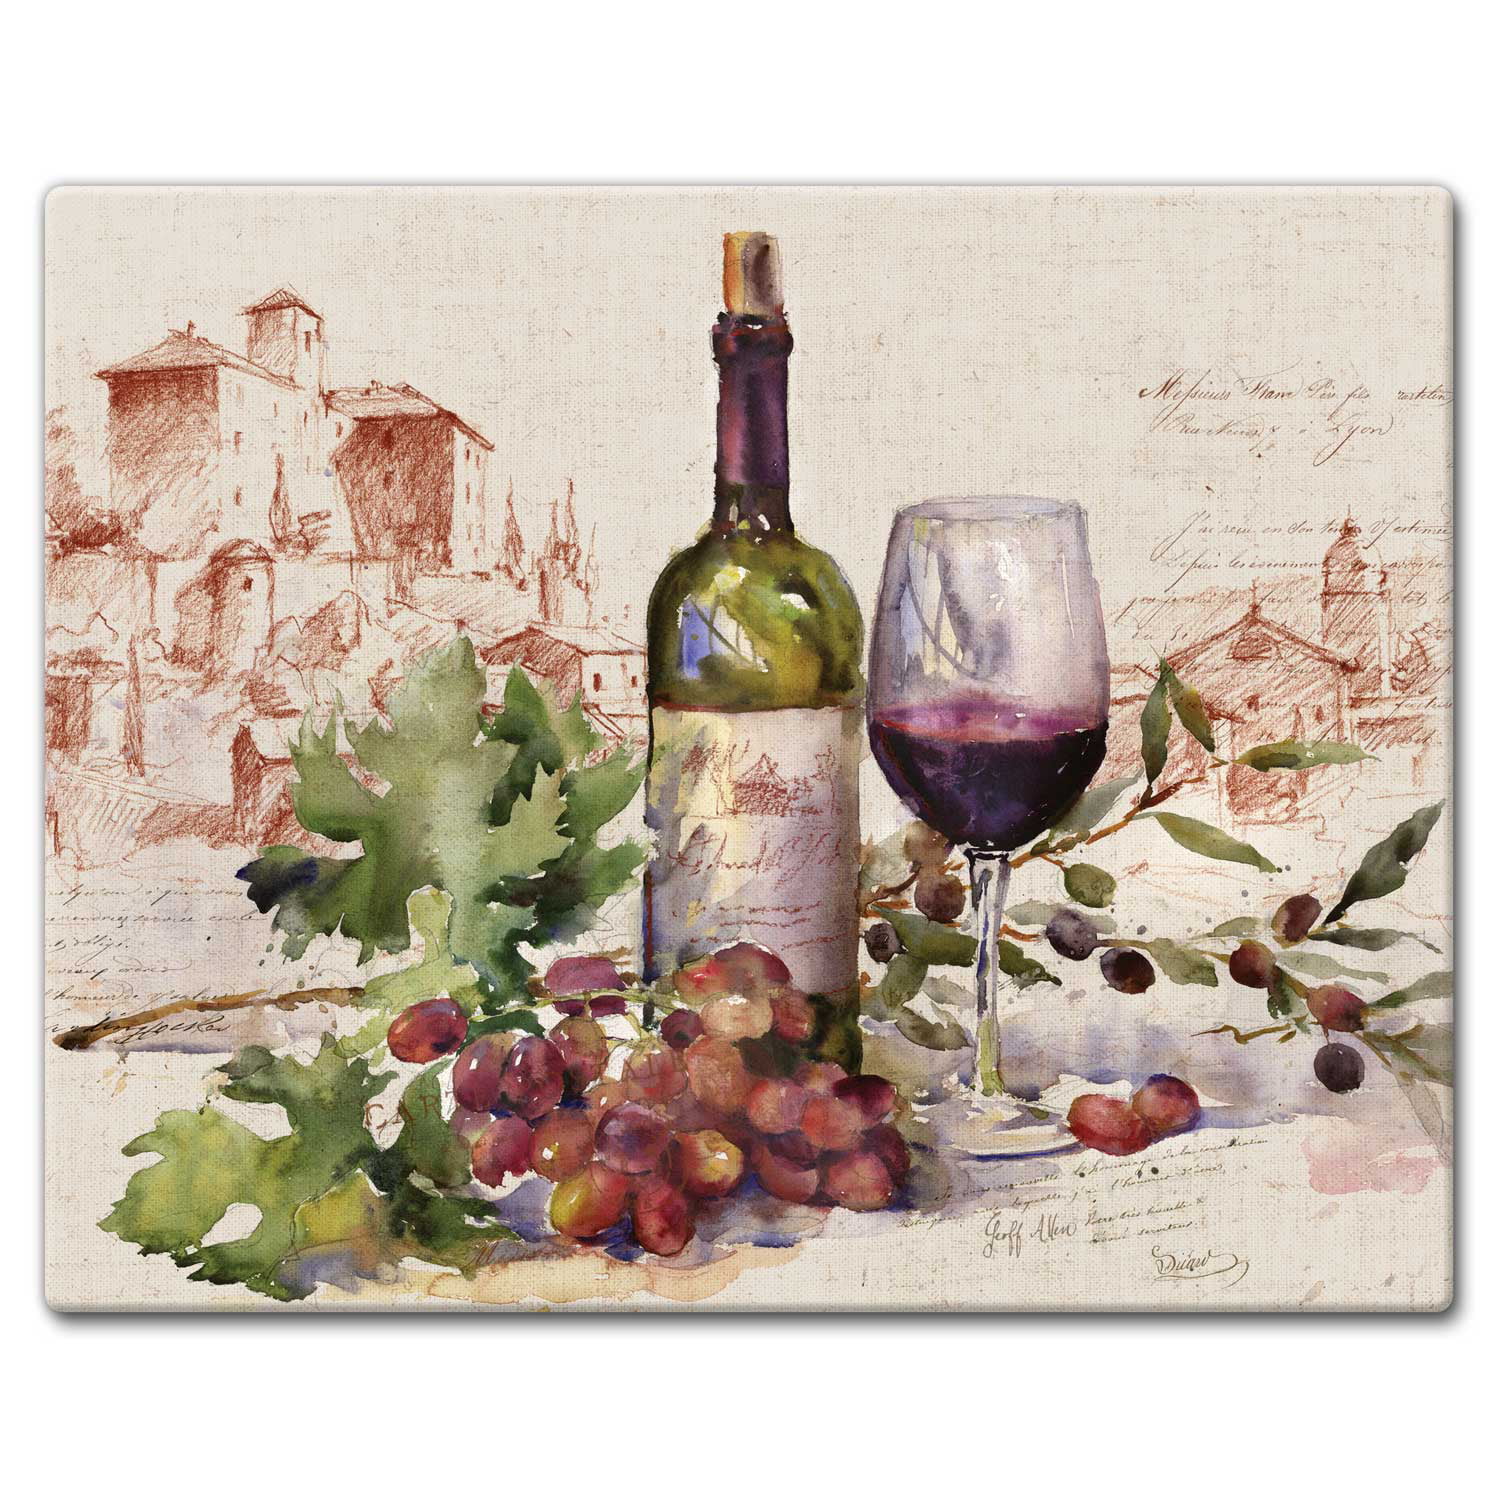 Details about   Tempered Glass 15"x12" Cutting Board Shatter-Resistant Dishwasher & Heat Safe